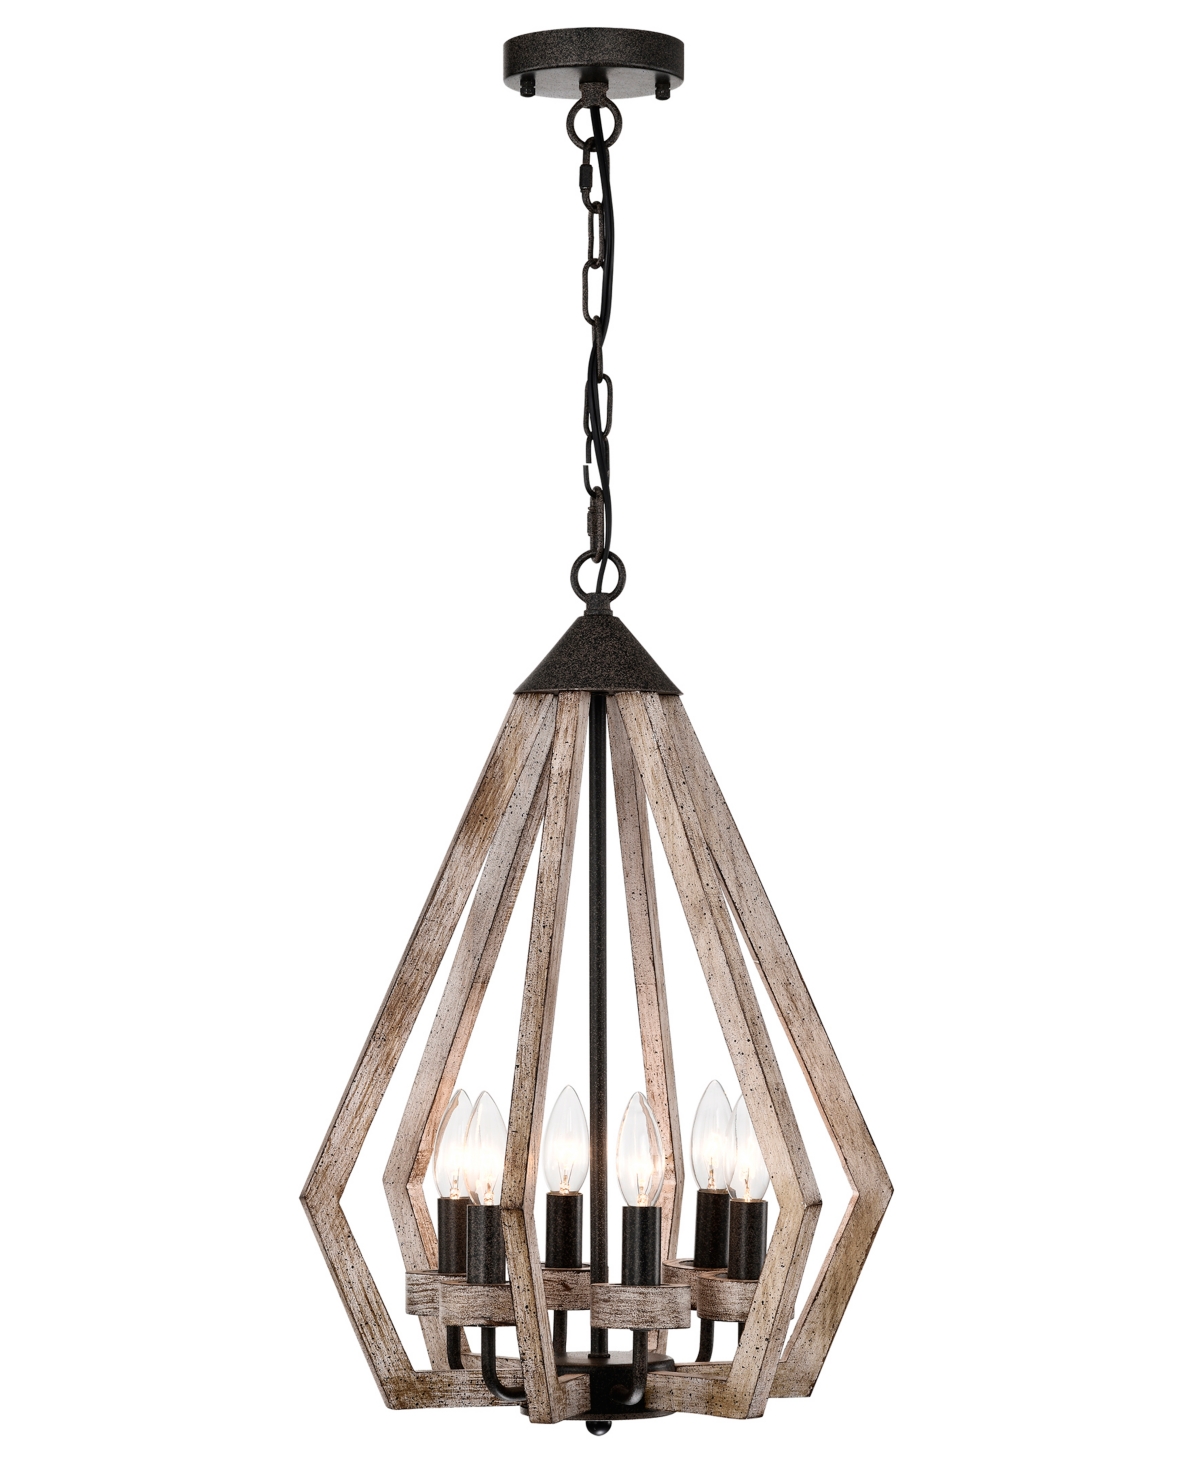 Home Accessories Cydney 16" Indoor Finish Chandelier With Light Kit In Rustic Brown And Faux Wood Grain